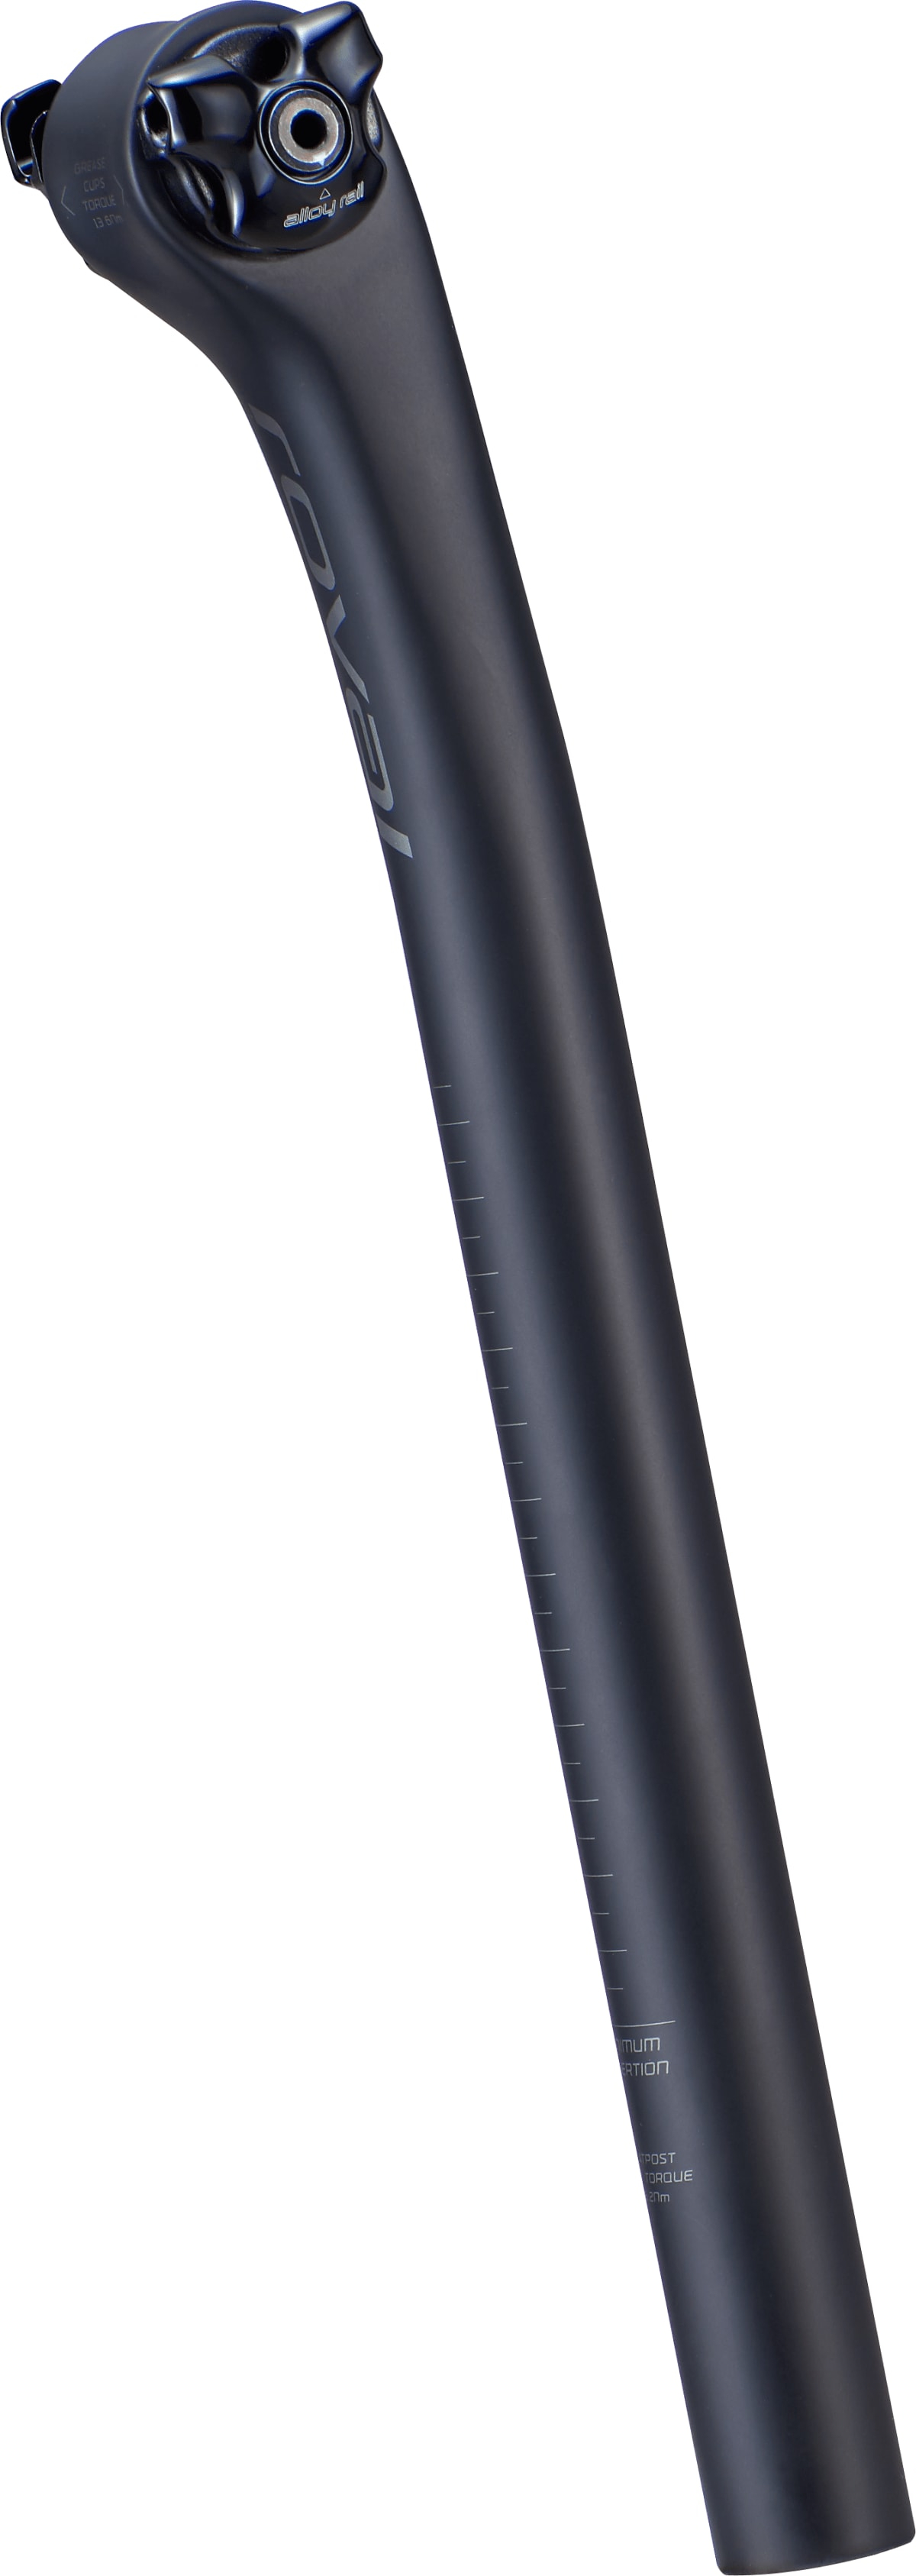 SPECIALIZED ROVAL TERRA CARBON SEATPOST - The Bike Factory